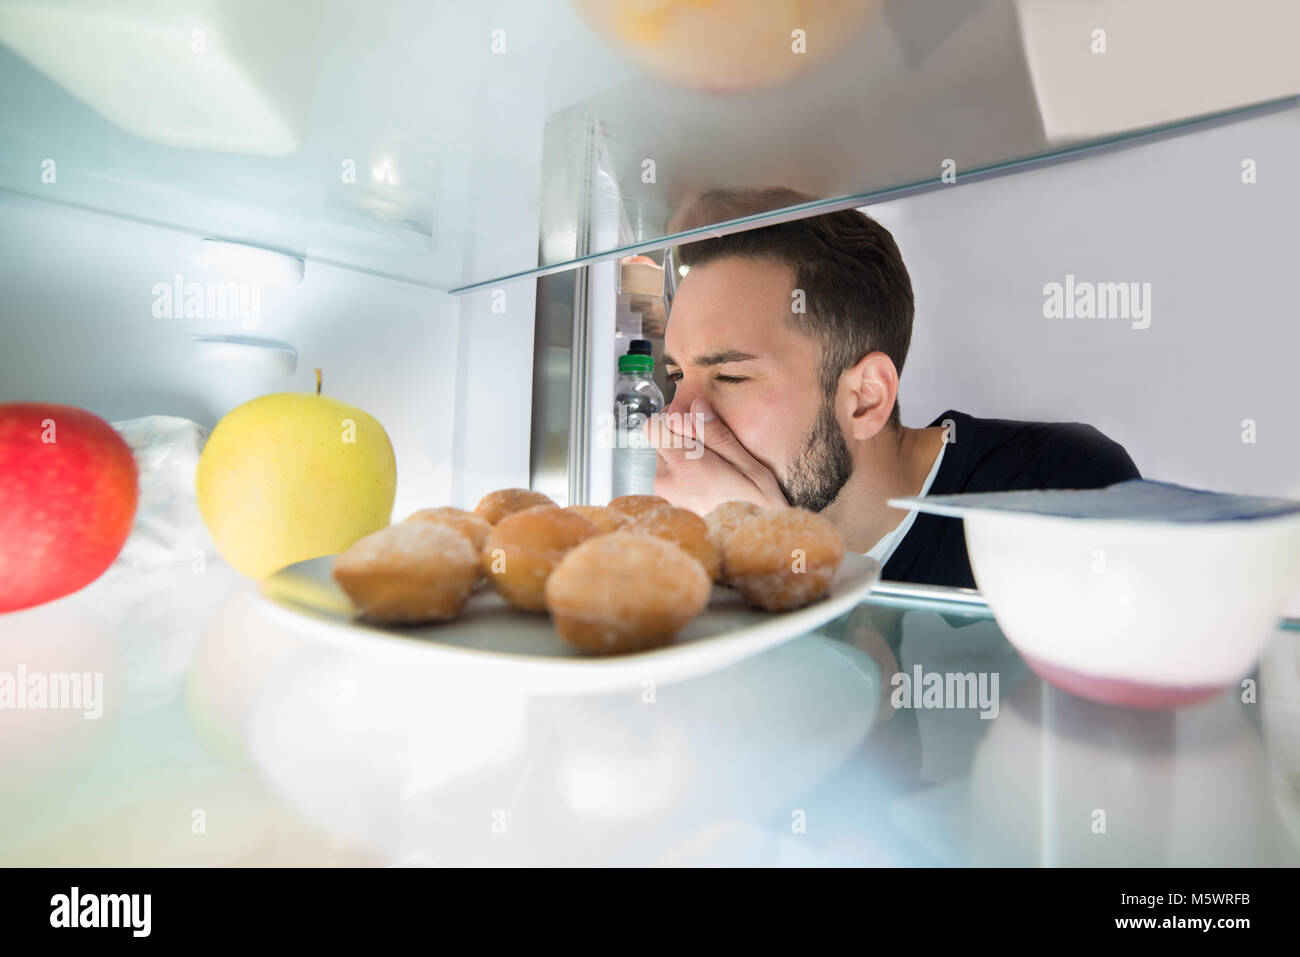 Close-up Of A Young Man Holding His Nose Near Foul Food In Refrigerator Stock Photo